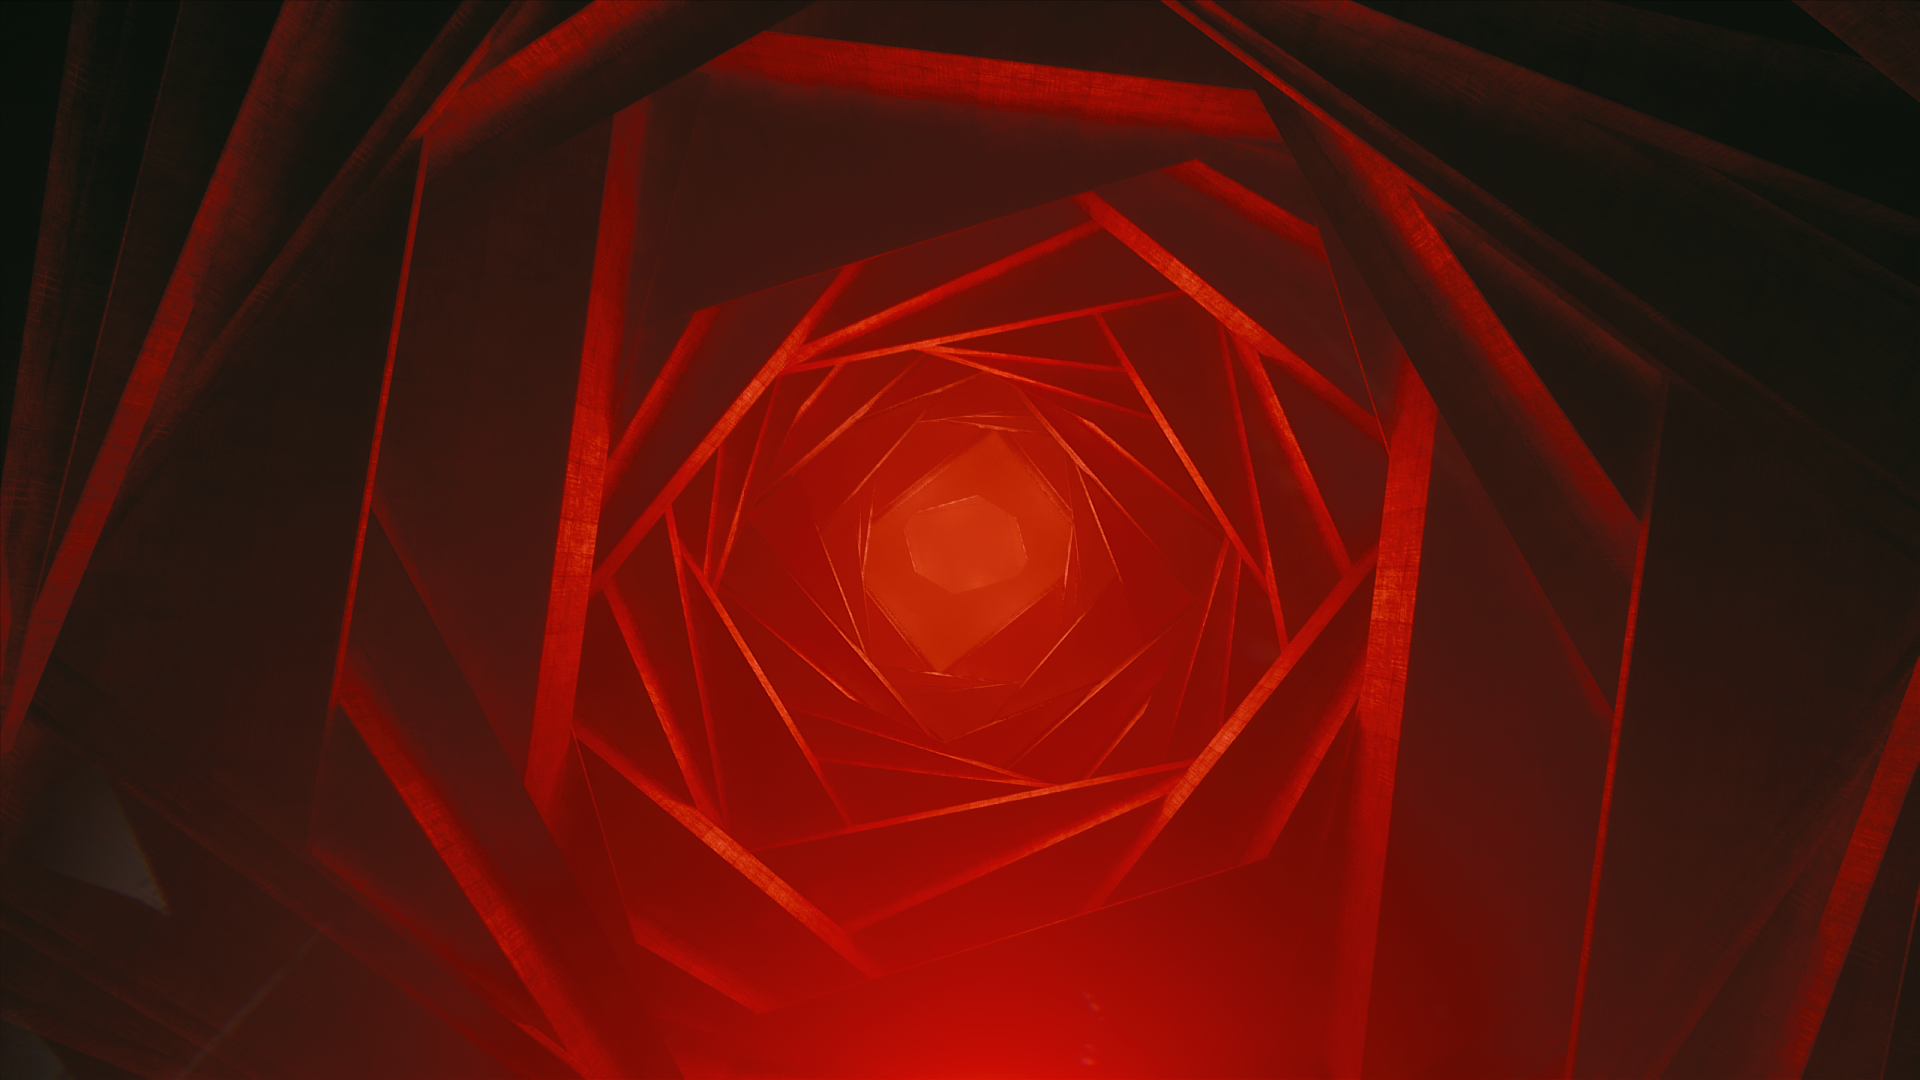 Control Surreal Abstract Physics Colorful Red Light Cubic Modern 1920x1080